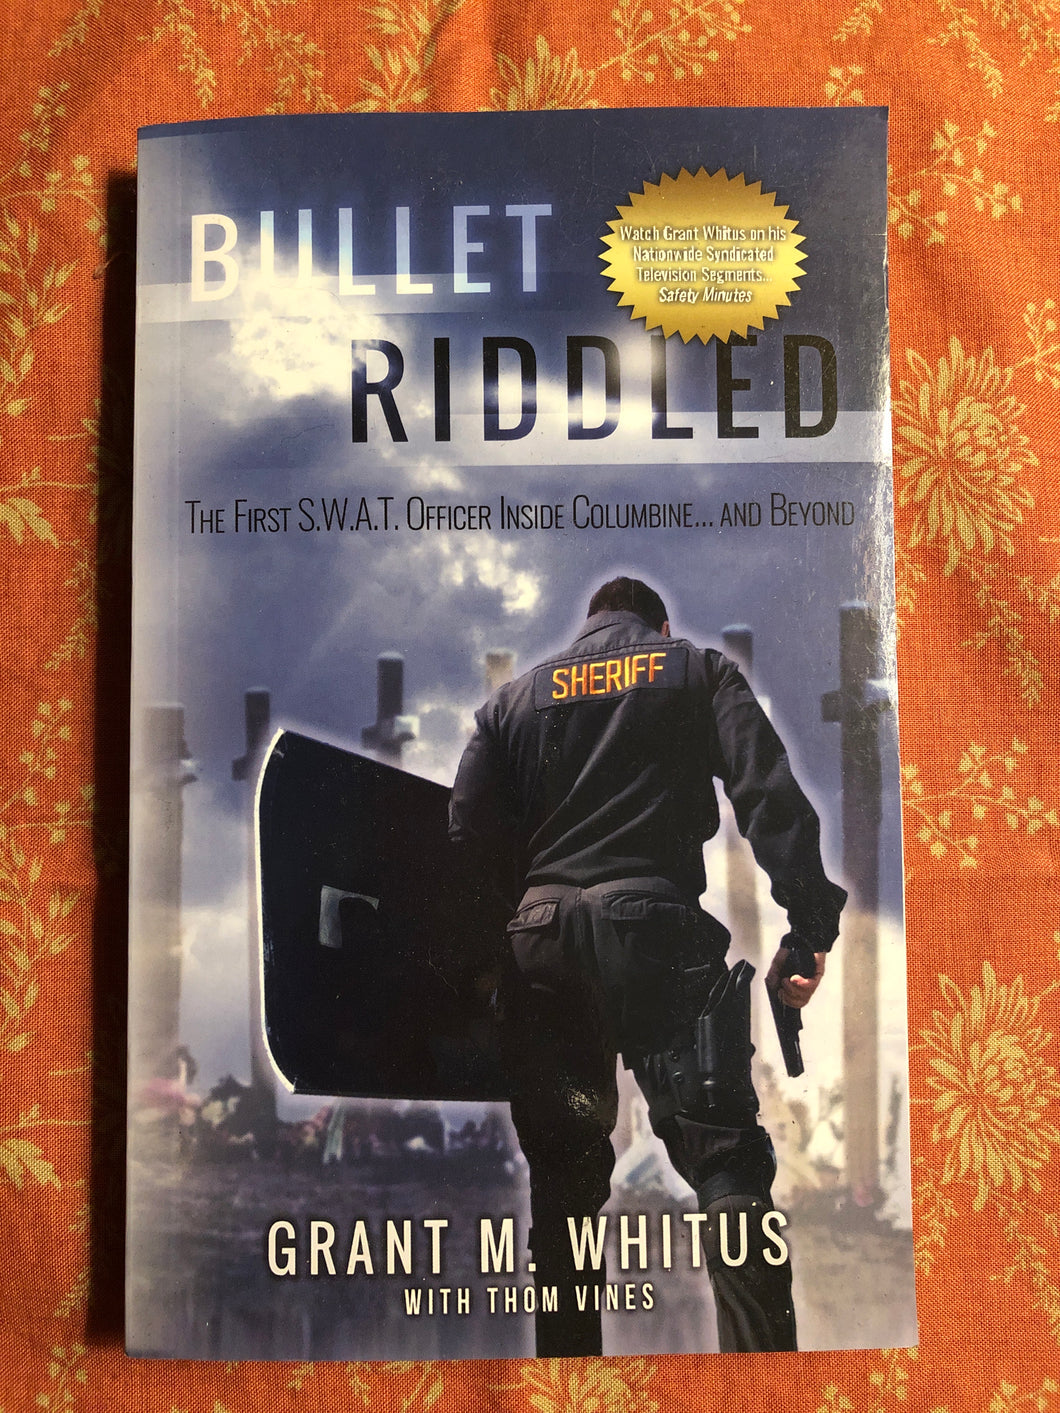 Bullet Riddled: The First S.W.A.T. Officer Inside Columbine... and Beyond